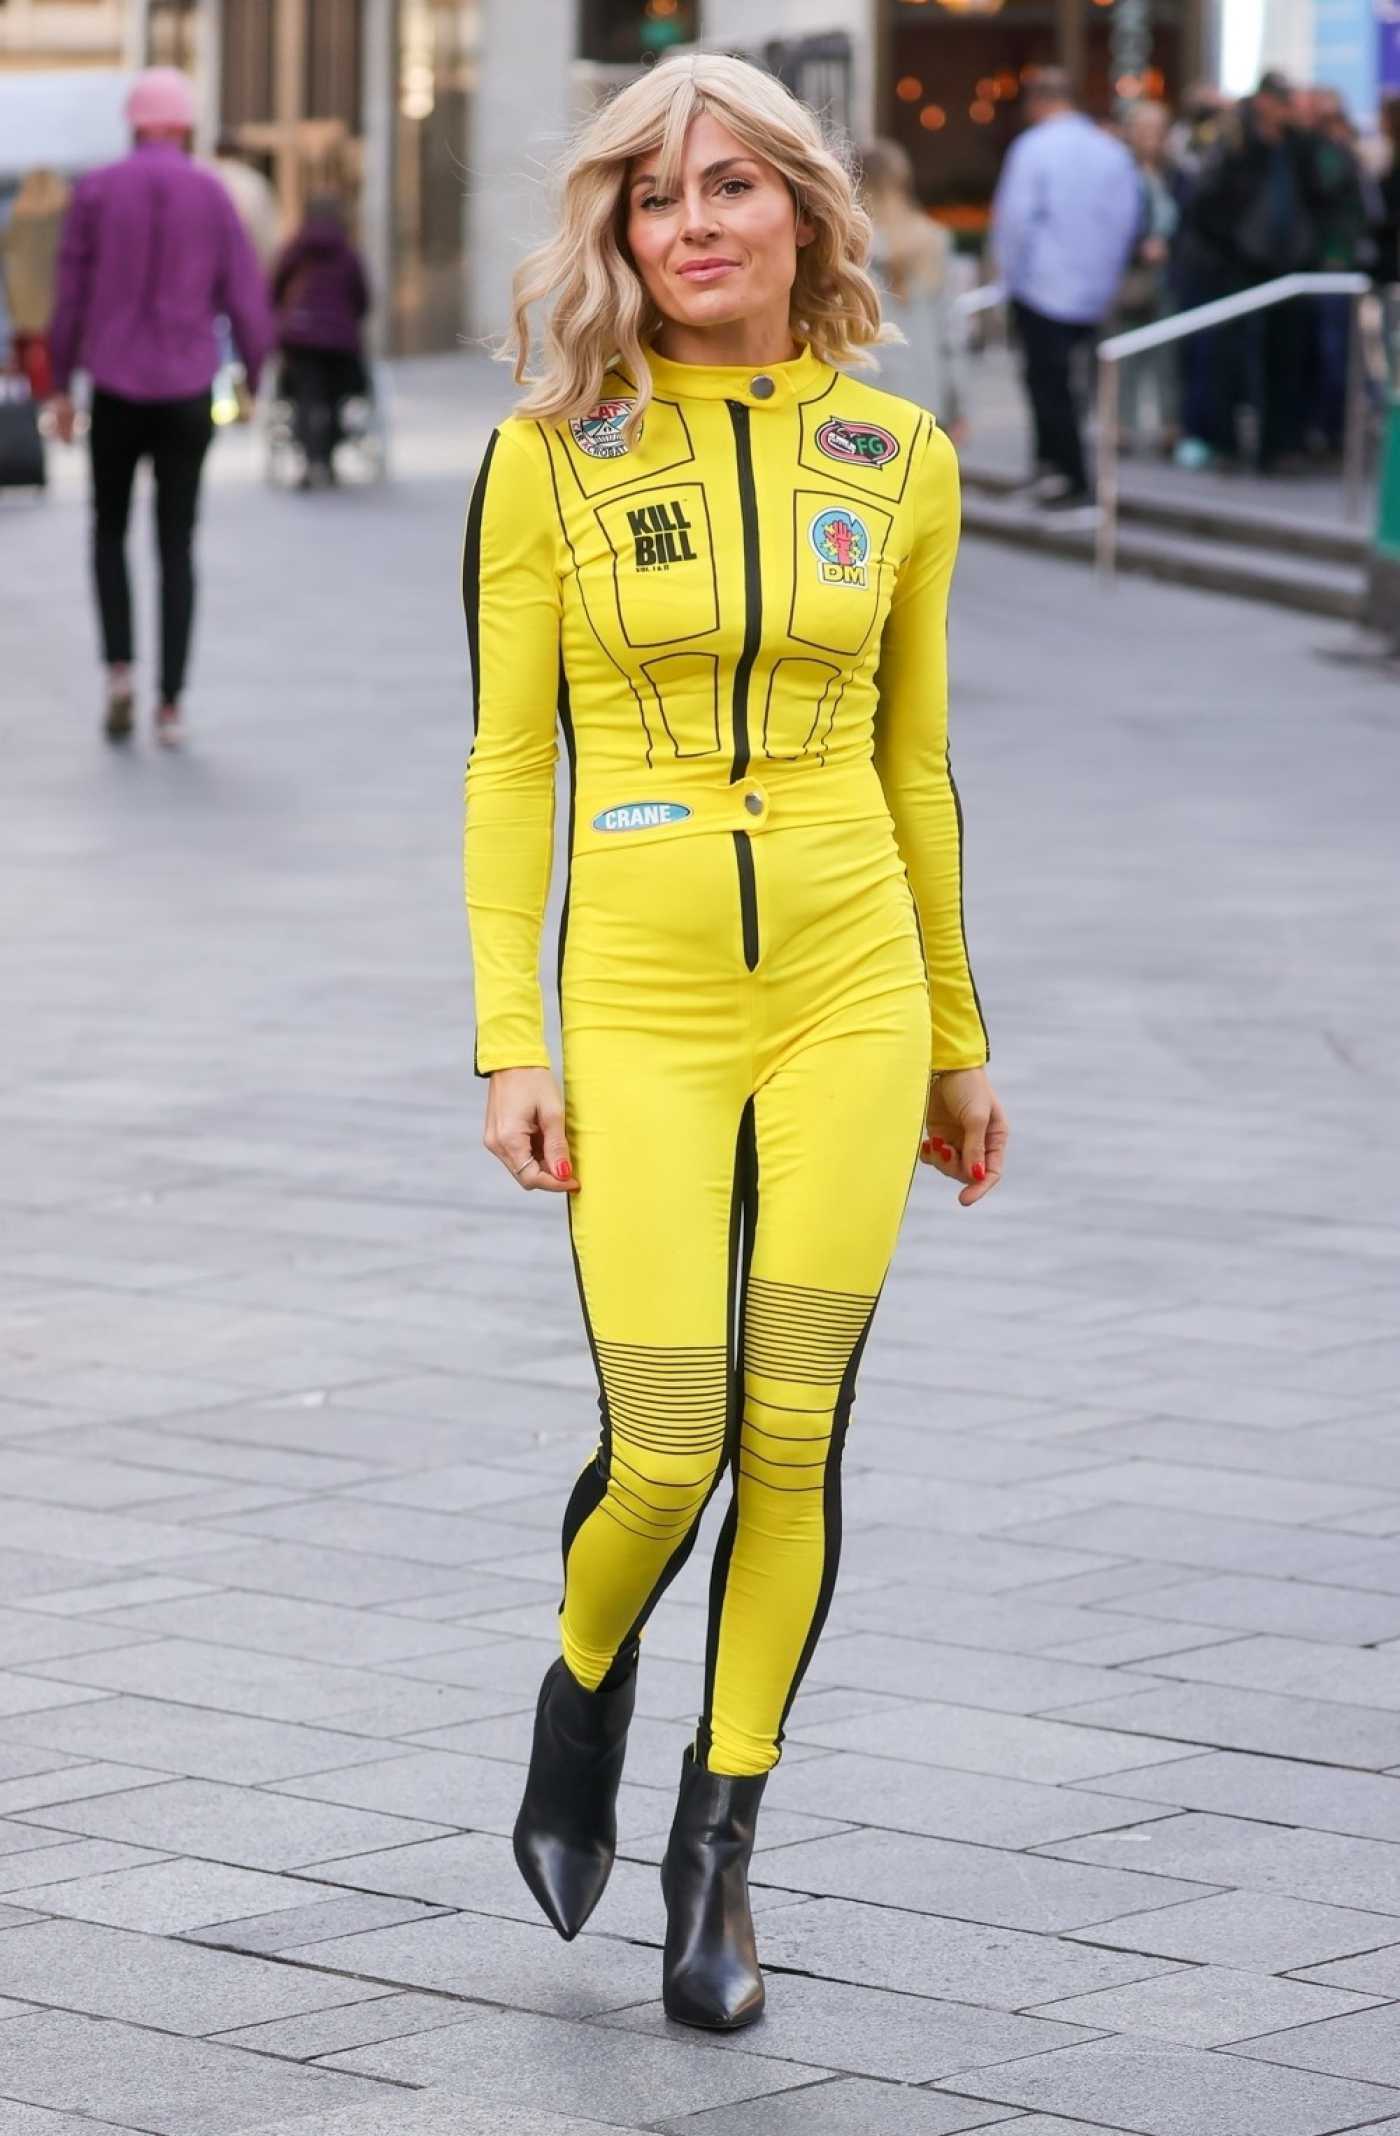 Zoe Hardman in a Yellow Catsuit Arrives at the Global Radio in London 10/07/2022